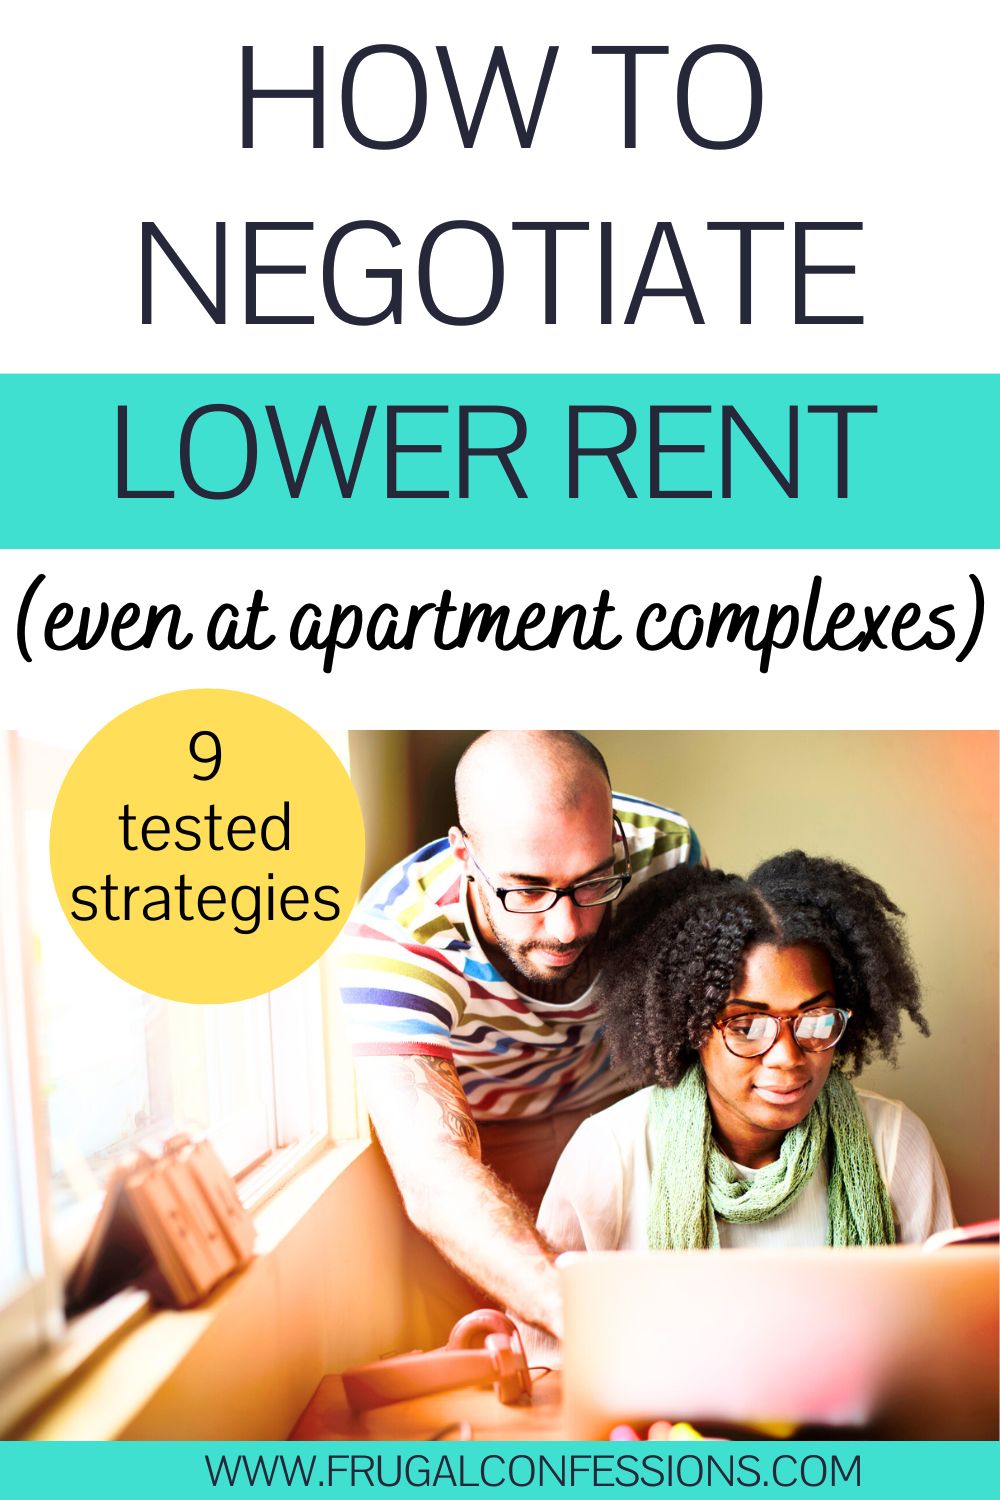 couple looking at computer, smiling, text overlay "how to negotiate lower rent even at apartment complexes"